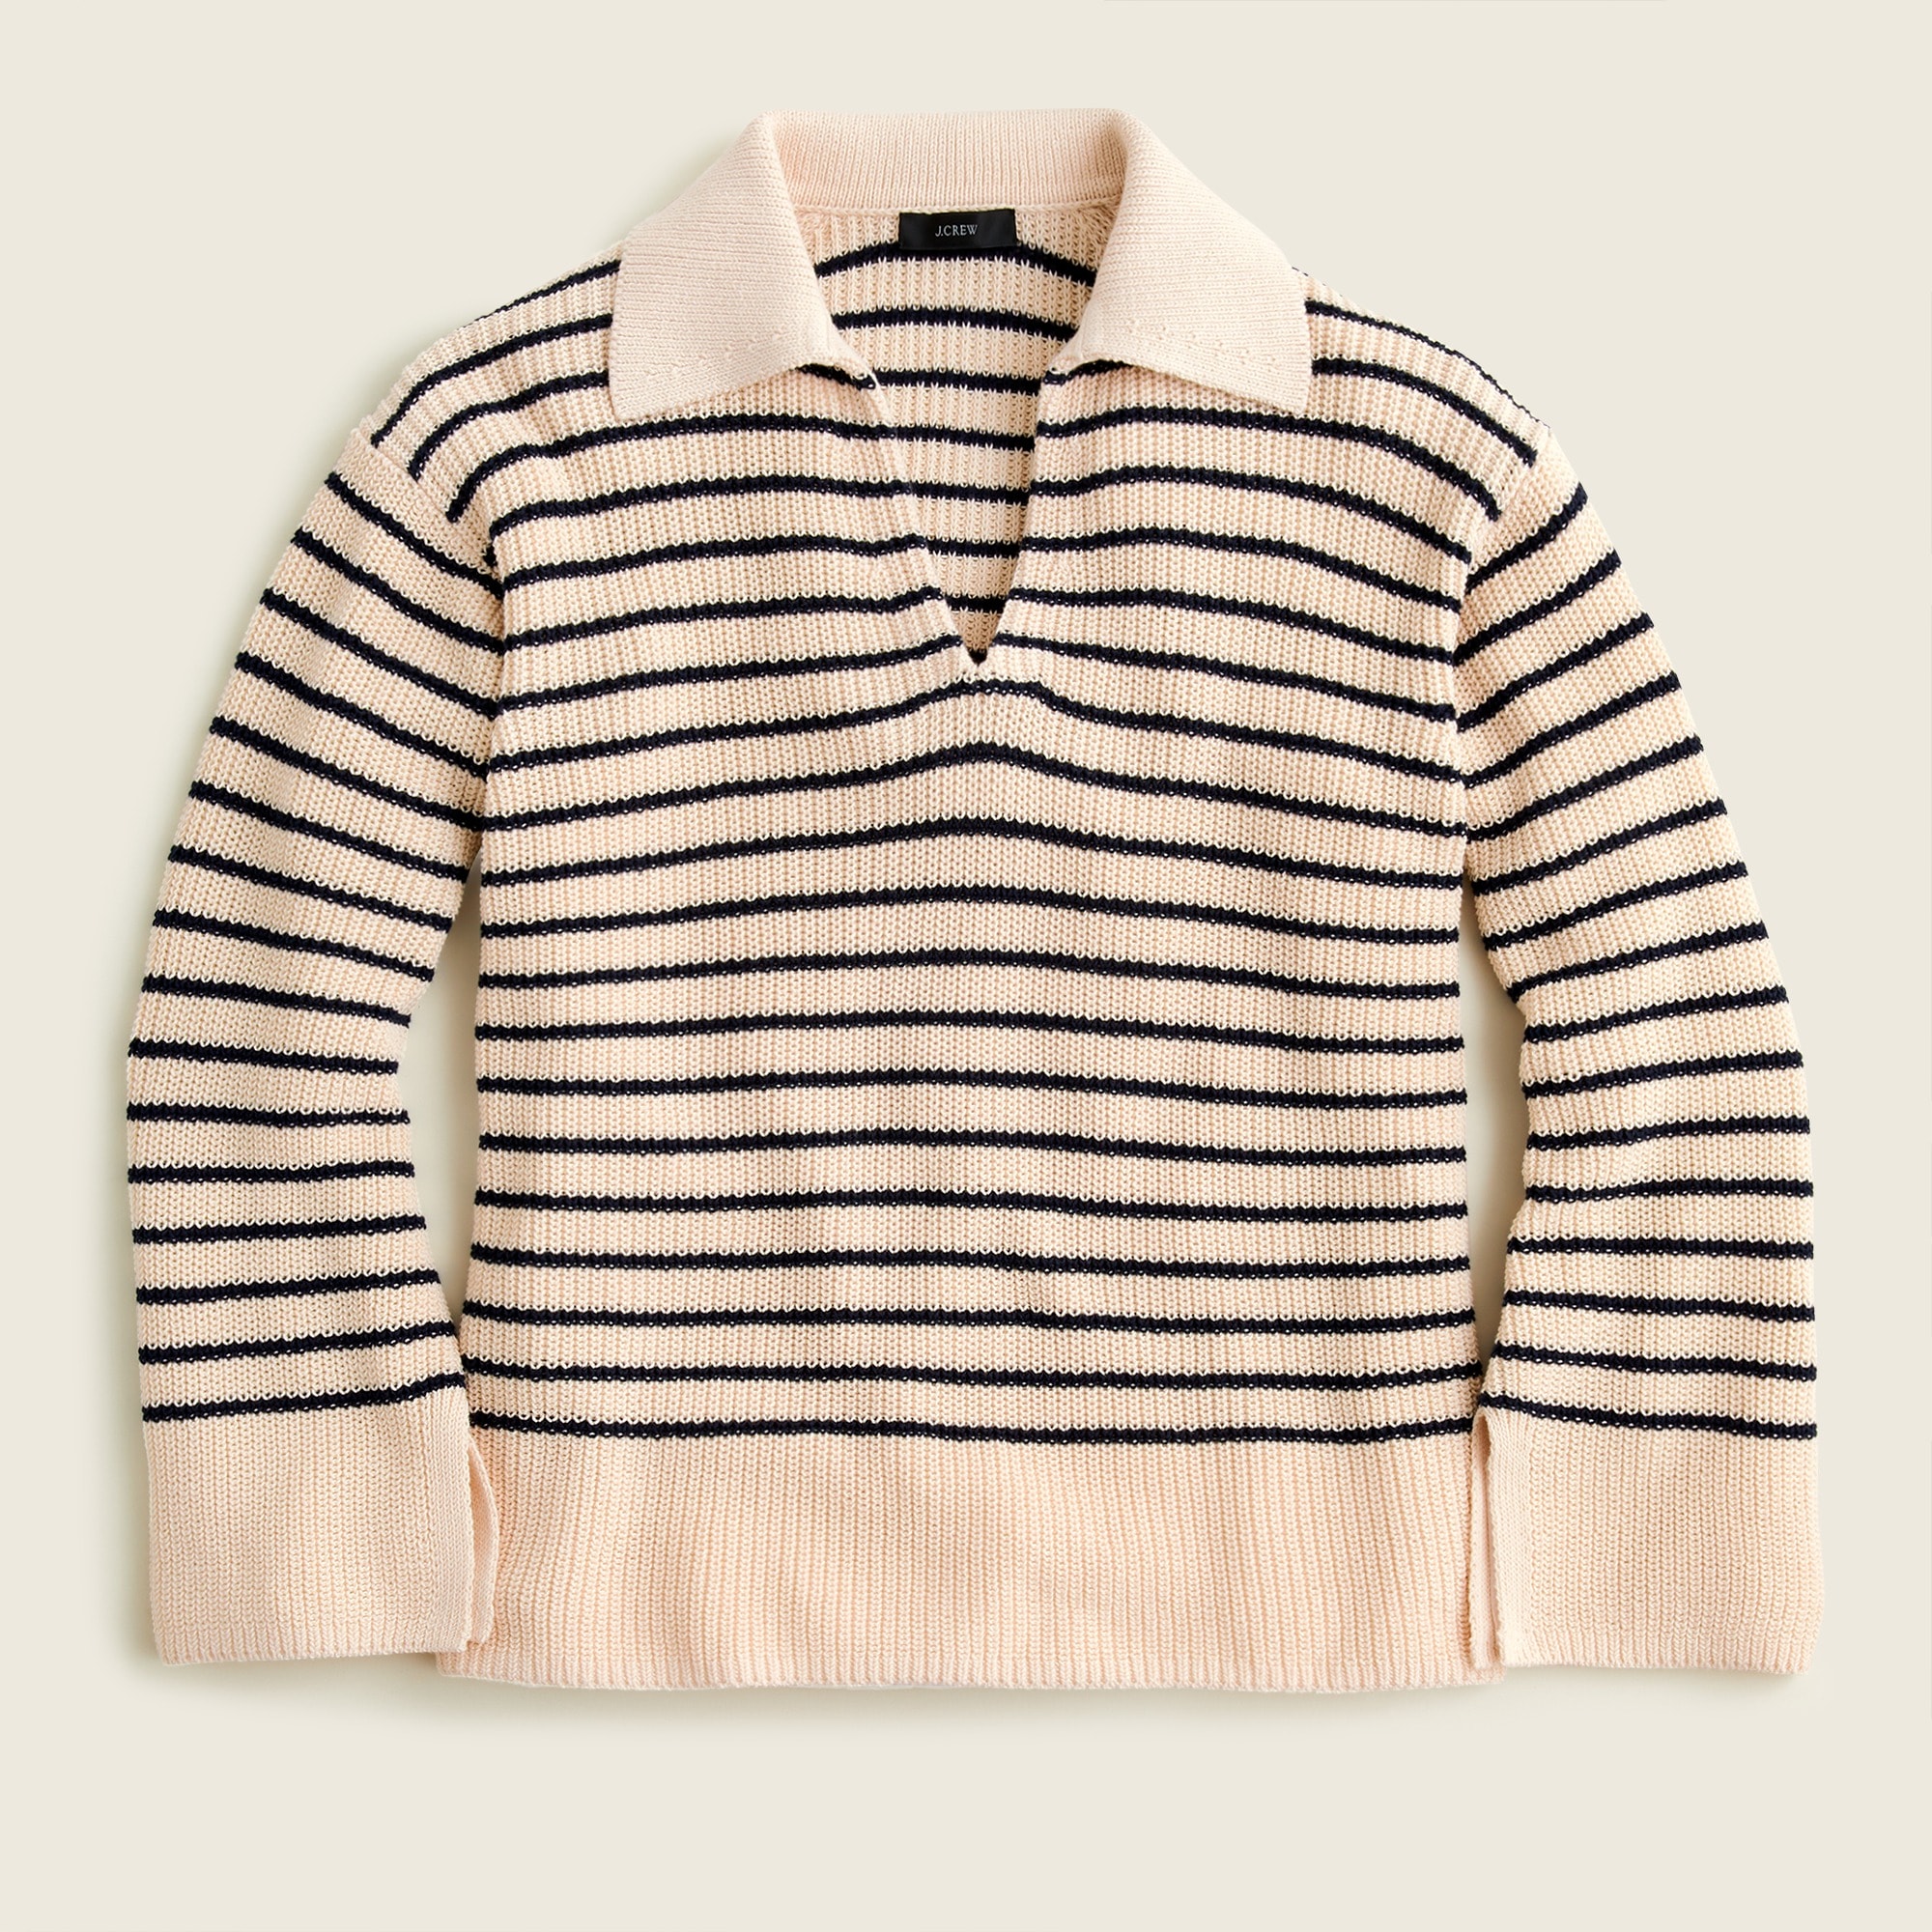 J.Crew: Relaxed Collared Sweater In Stripe For Women